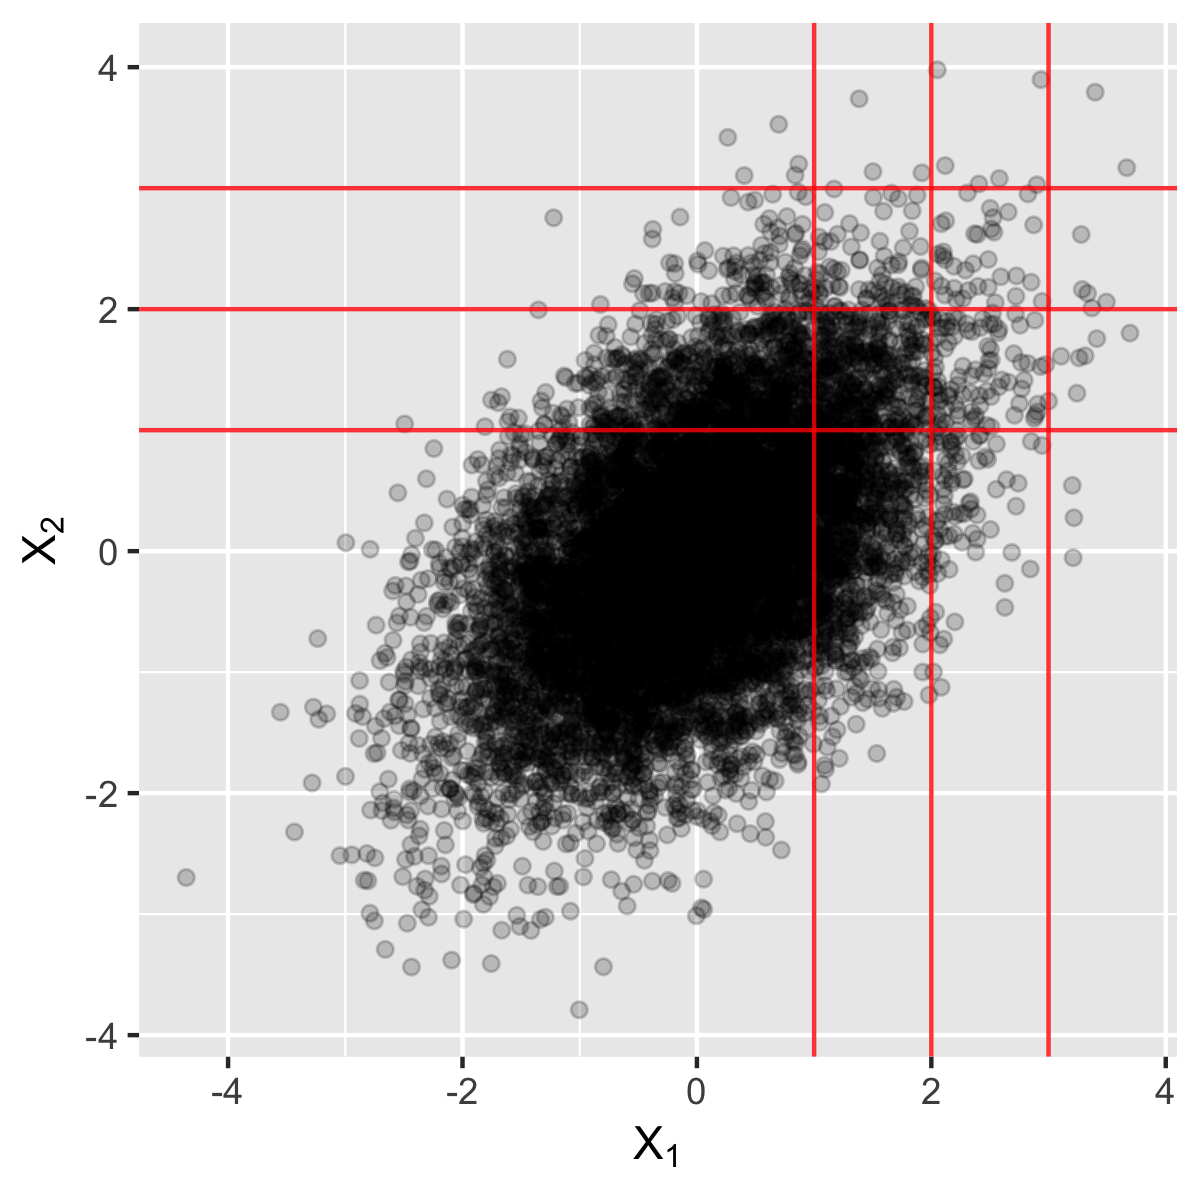 Tail independence of bivariate Gaussian distributions.